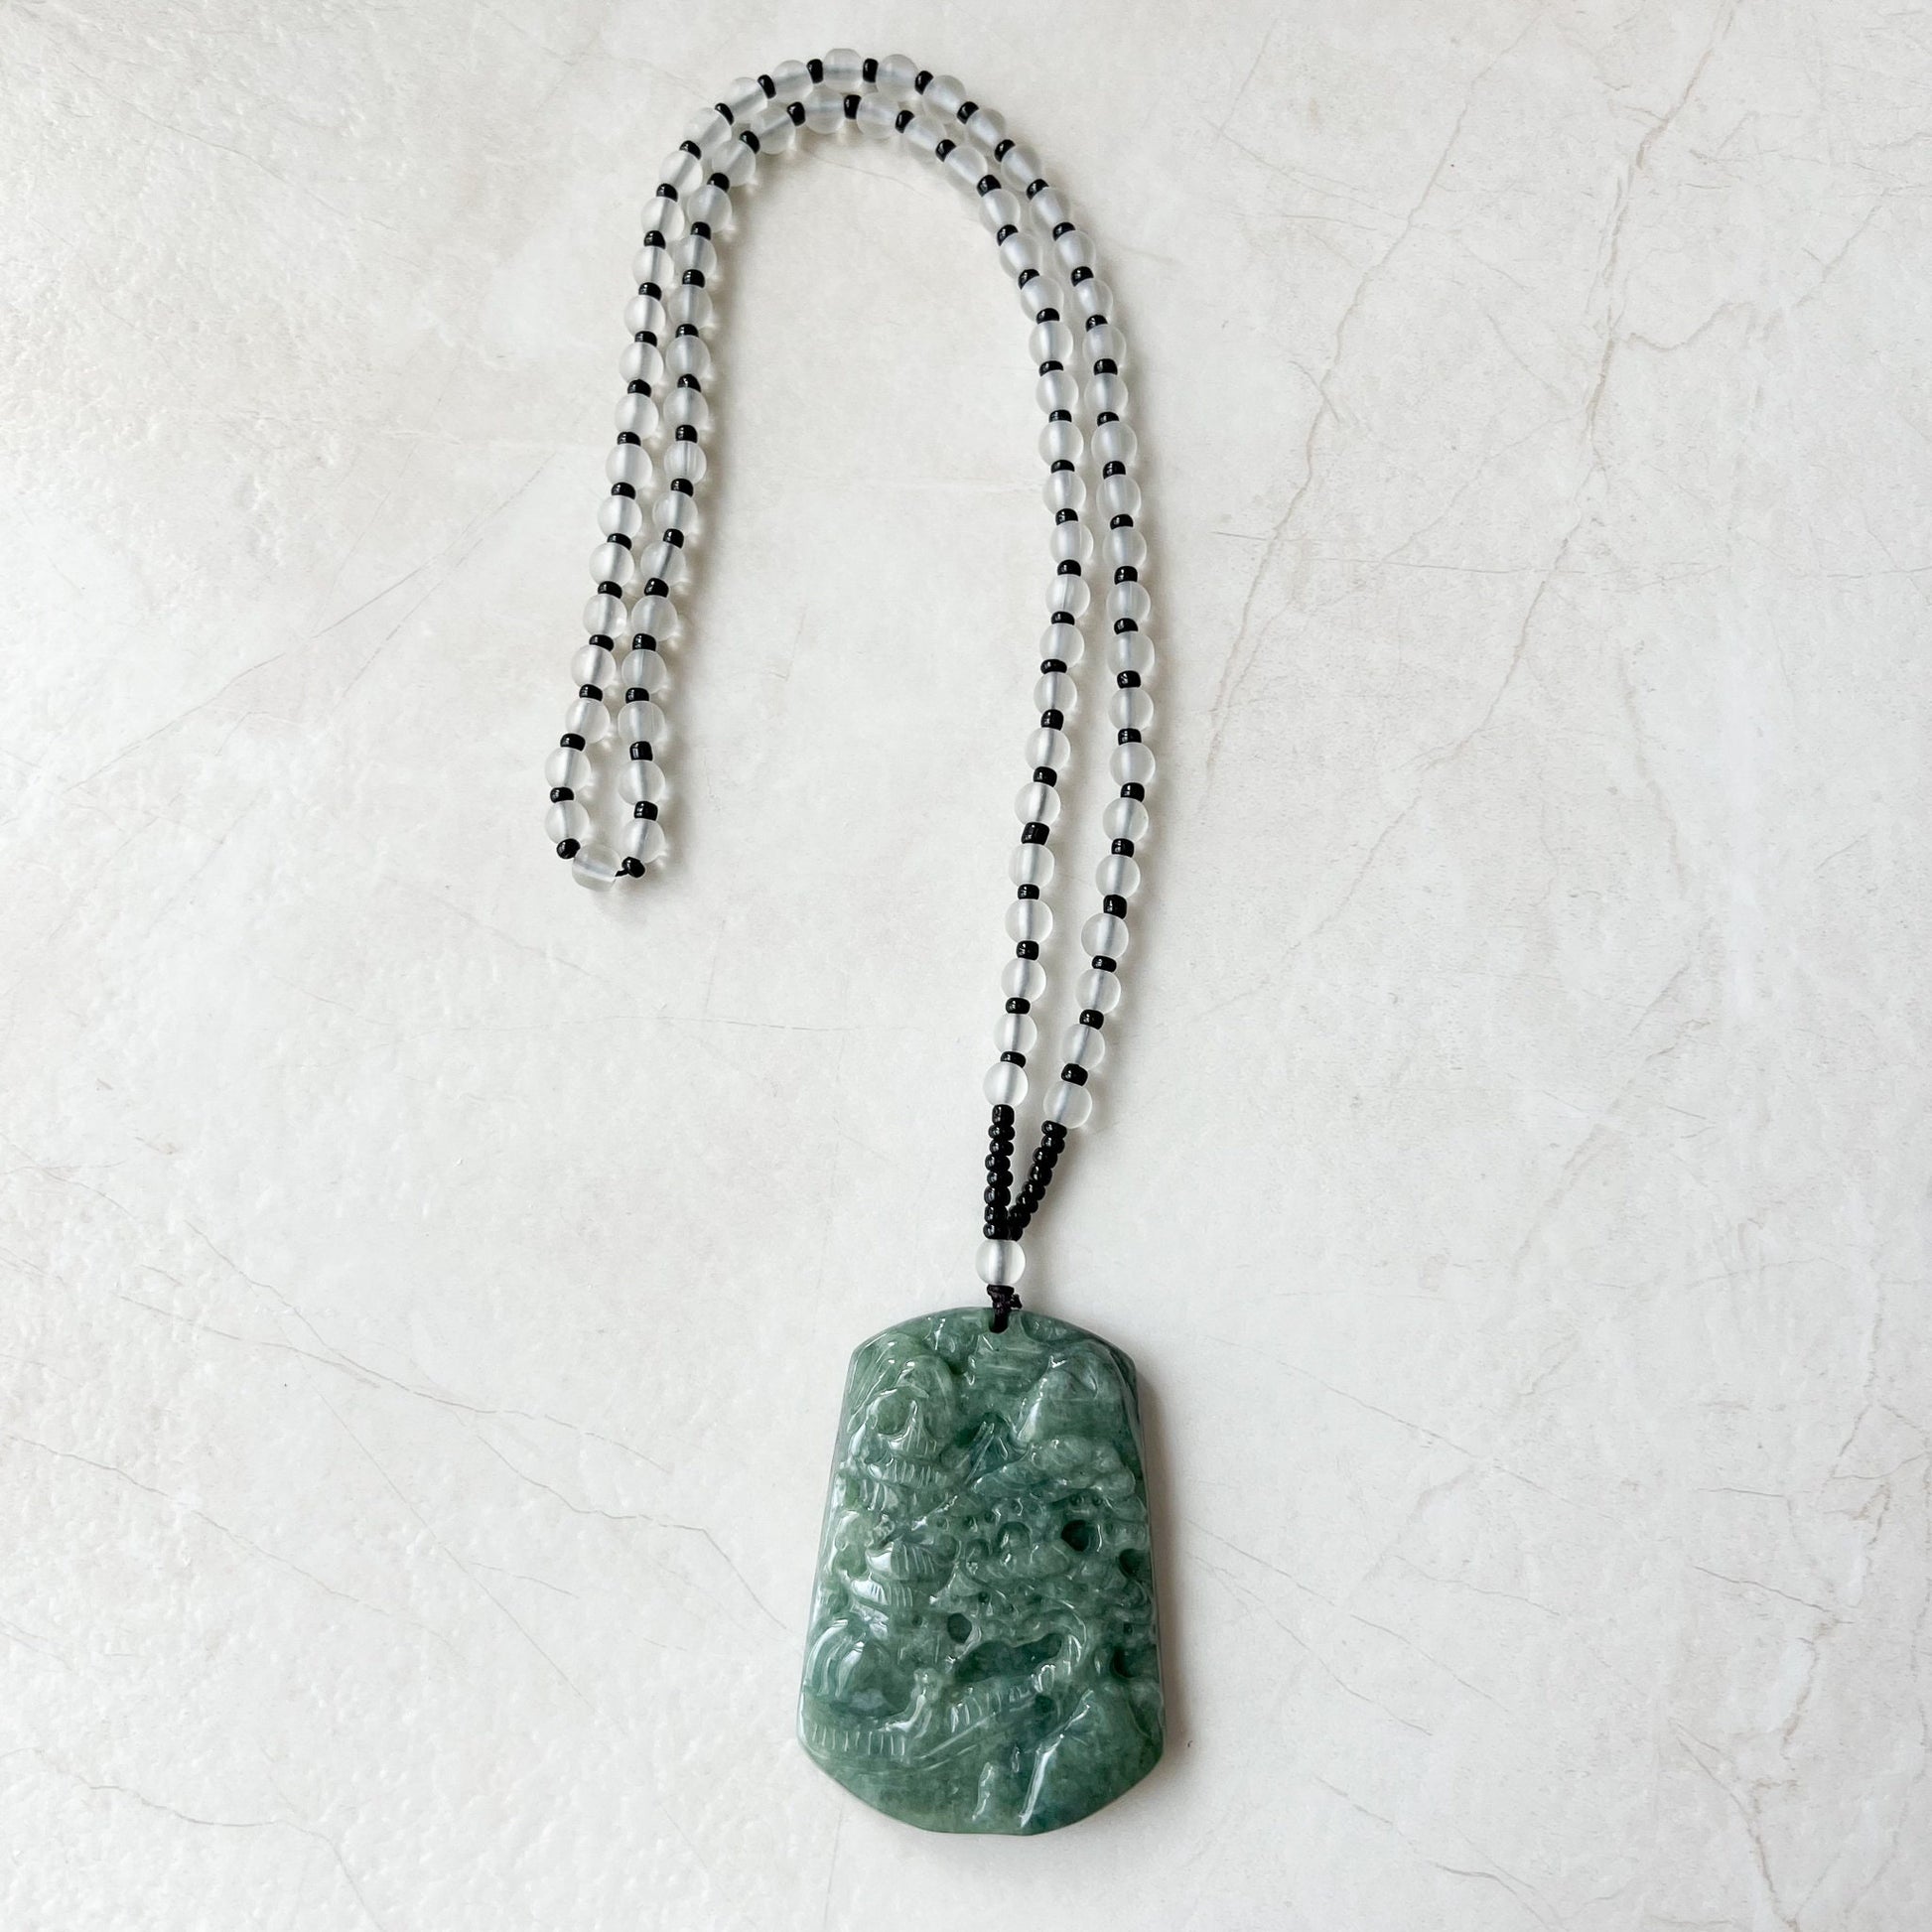 Jadeite Jade Landscape Tree Mountain Forest River Scenery Hand Carved Pendant Necklace, YJ-0921-0114512 - AriaDesignCollection